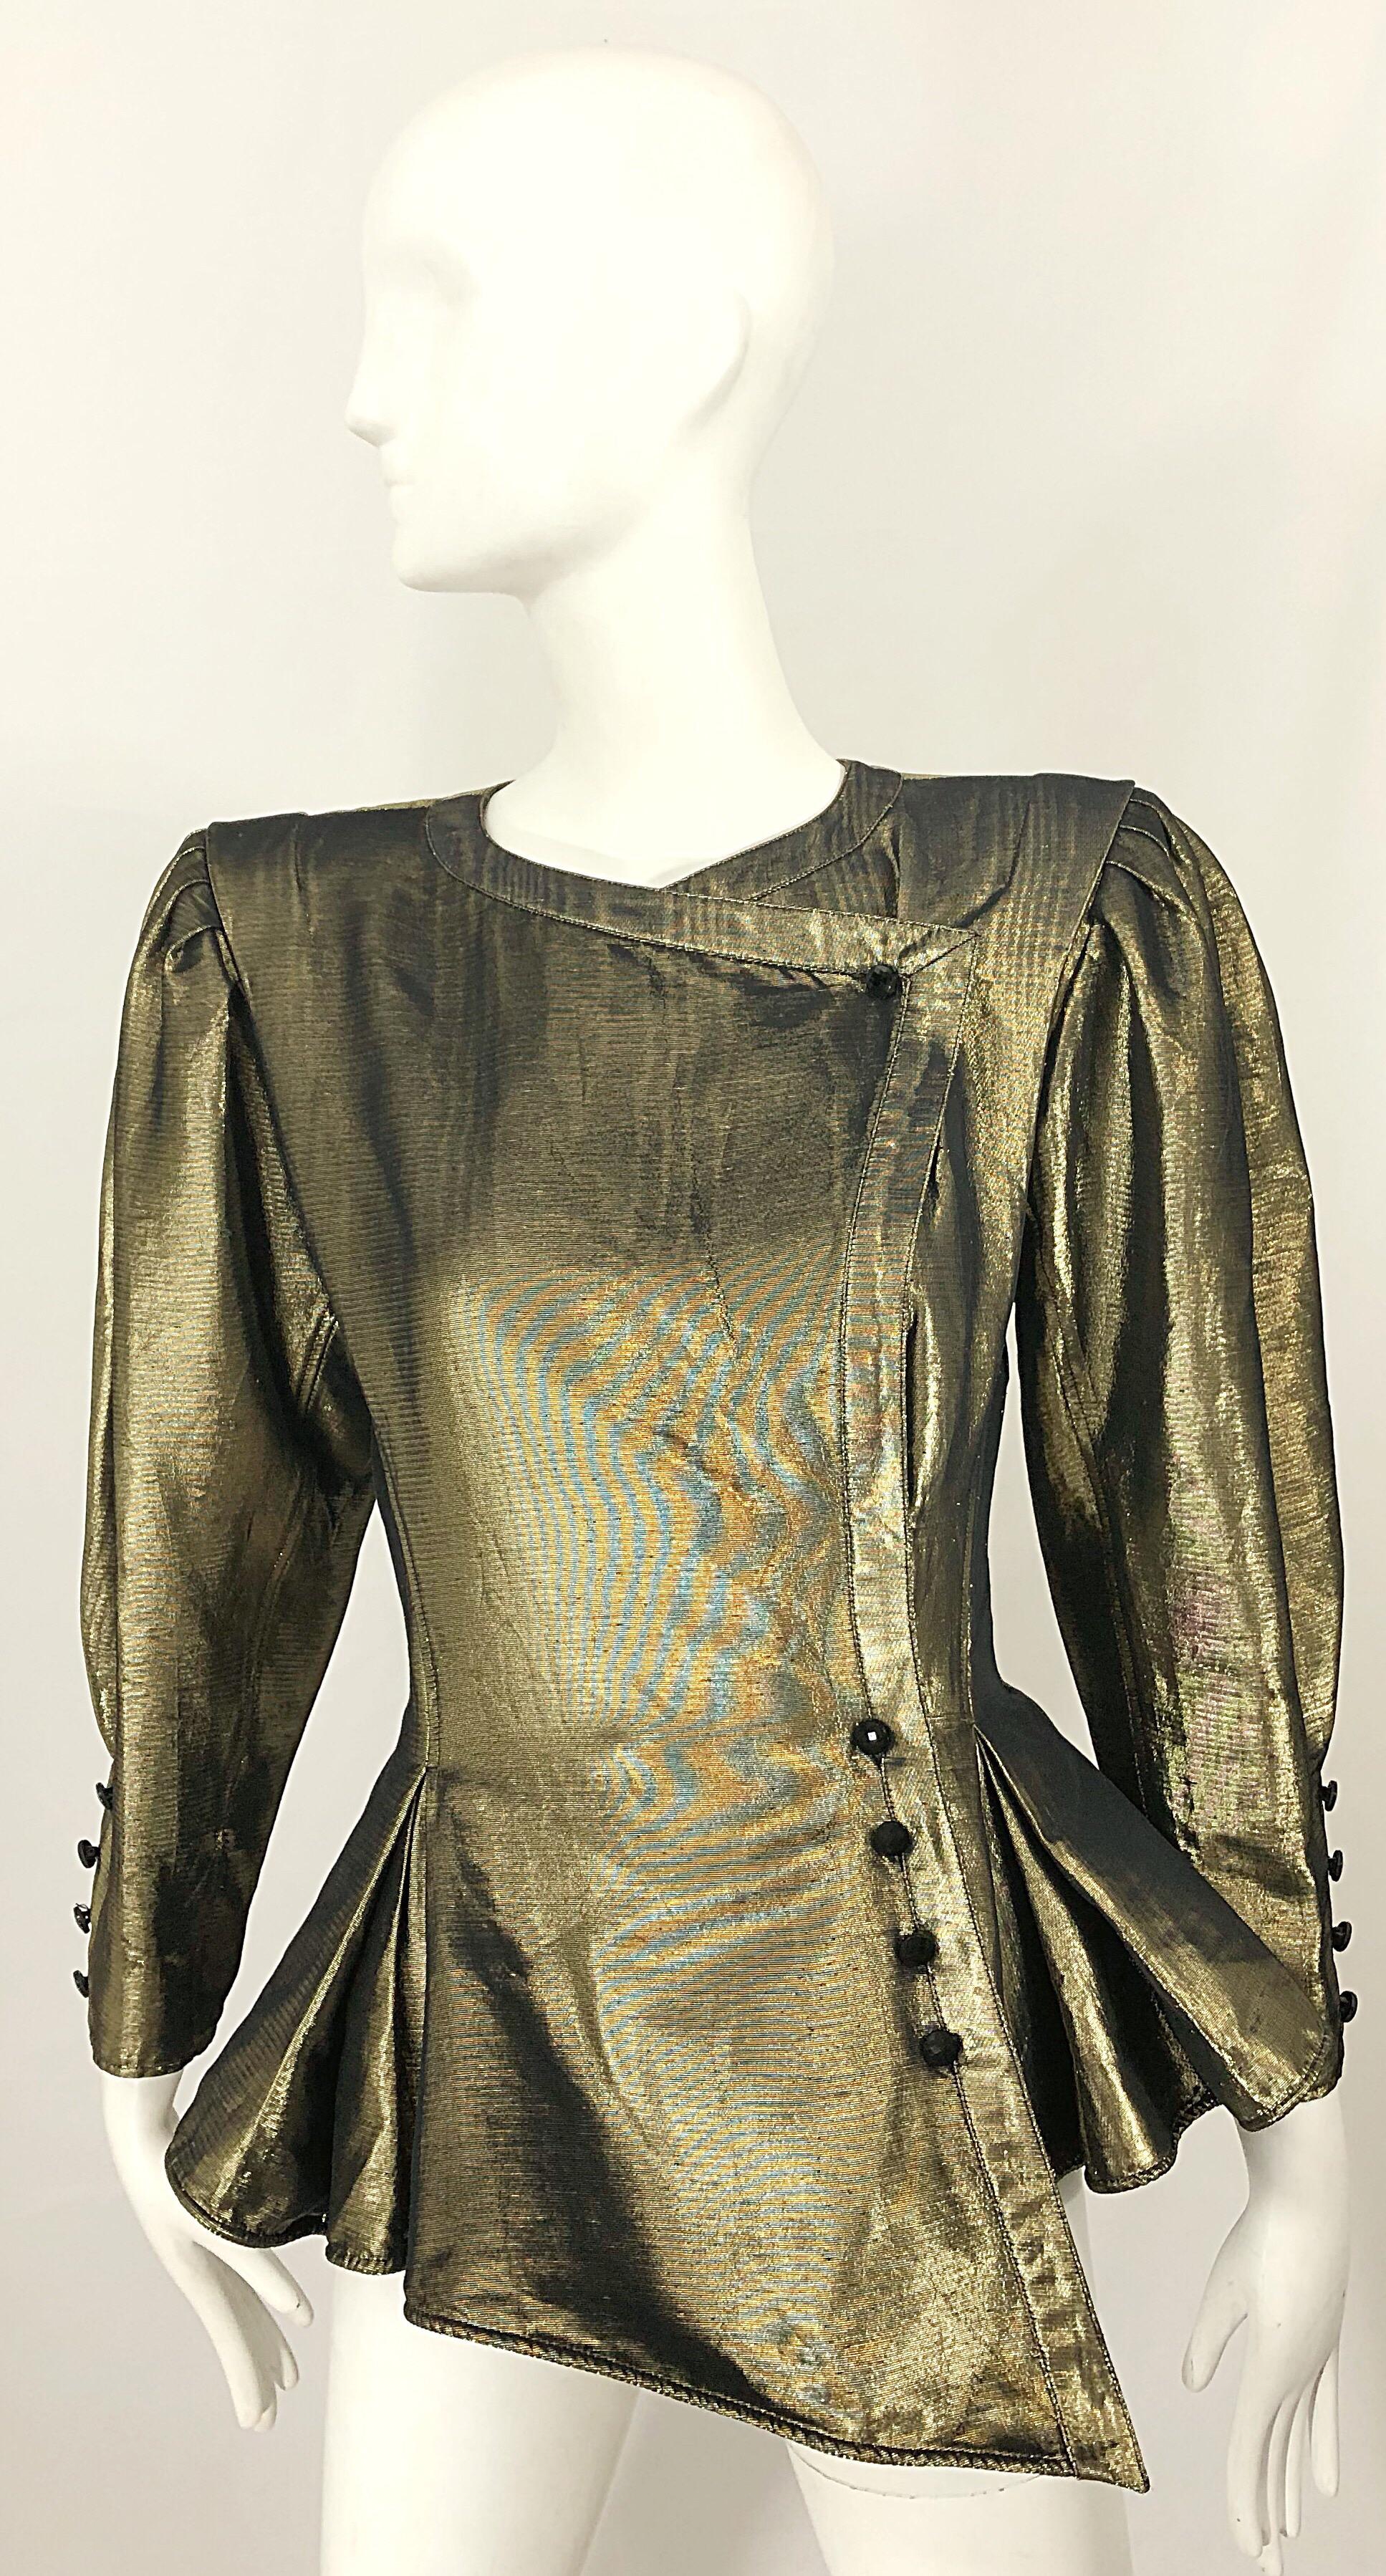 Insanely chic vintage late 1980s EMANUEL UNGARO gold silk metallic peplum jacket! Features strong shoulders with built in shoulder pads. Black lacquer buttons up the left waist with hidden interior buttons. Fully lined. Great layered or alone. Can